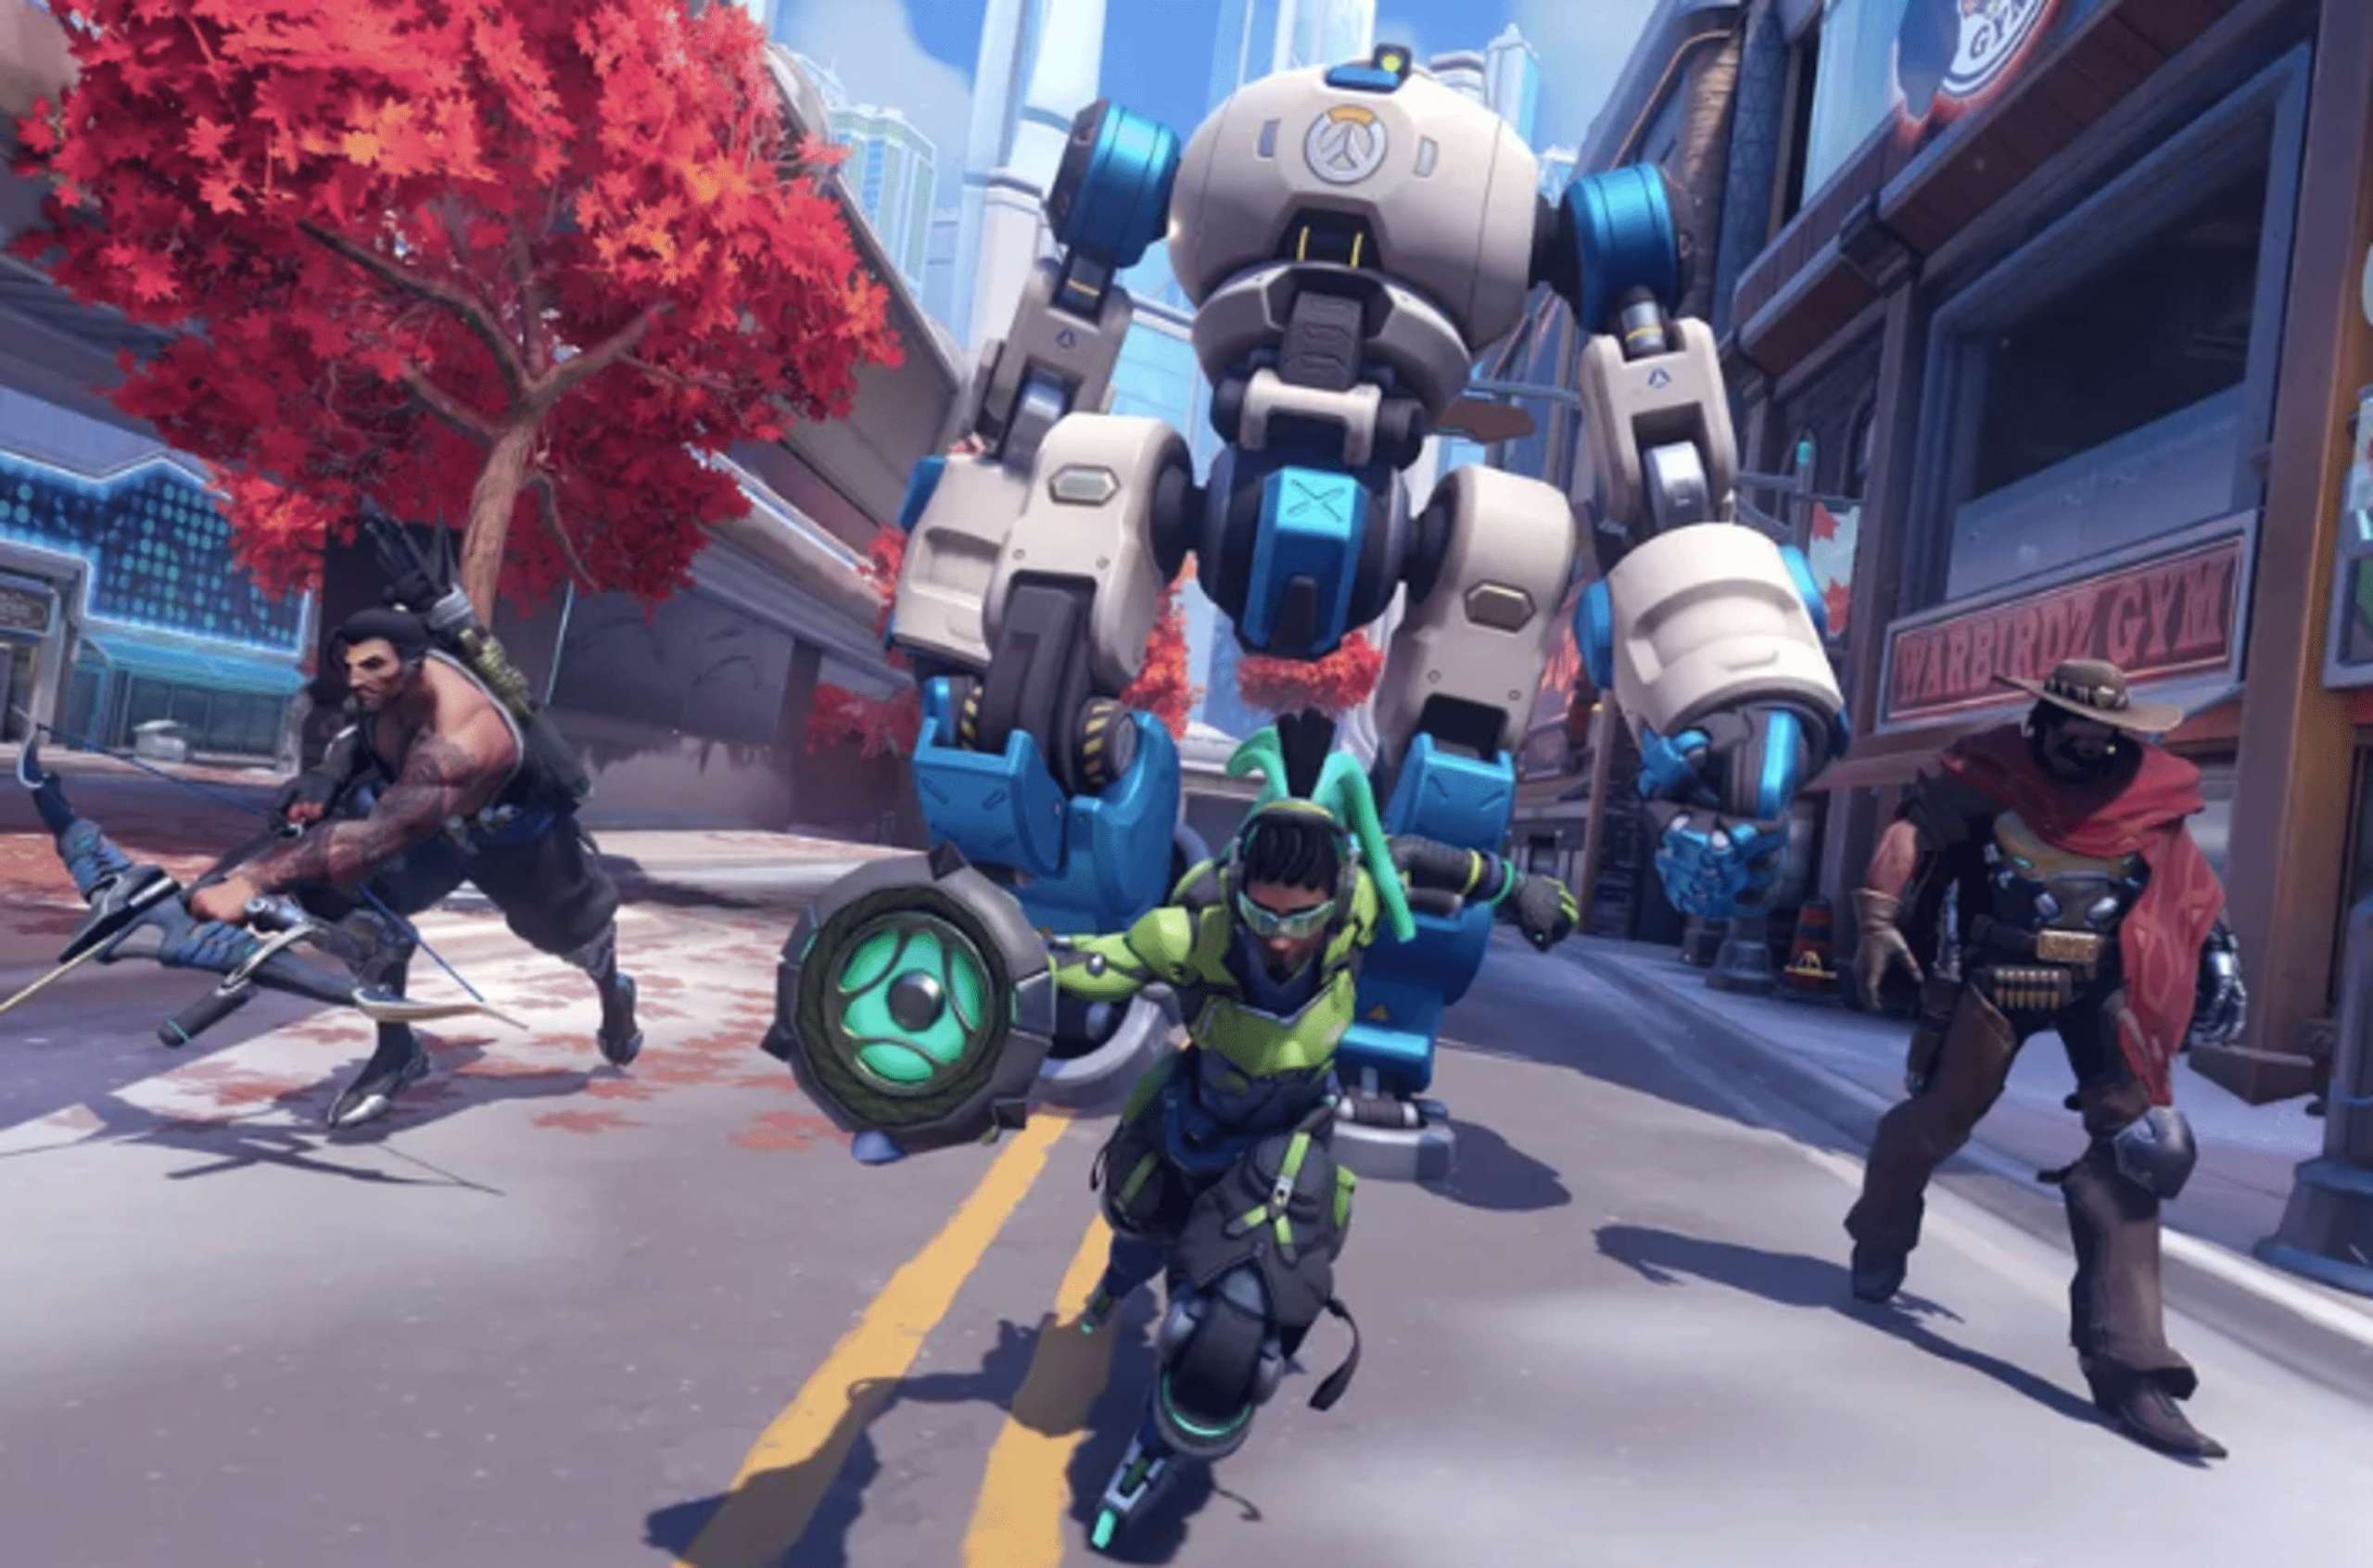 Numbani And Necropolis Are Available Once Again In Overwatch 2’s Map Rotation After The Latest Patch